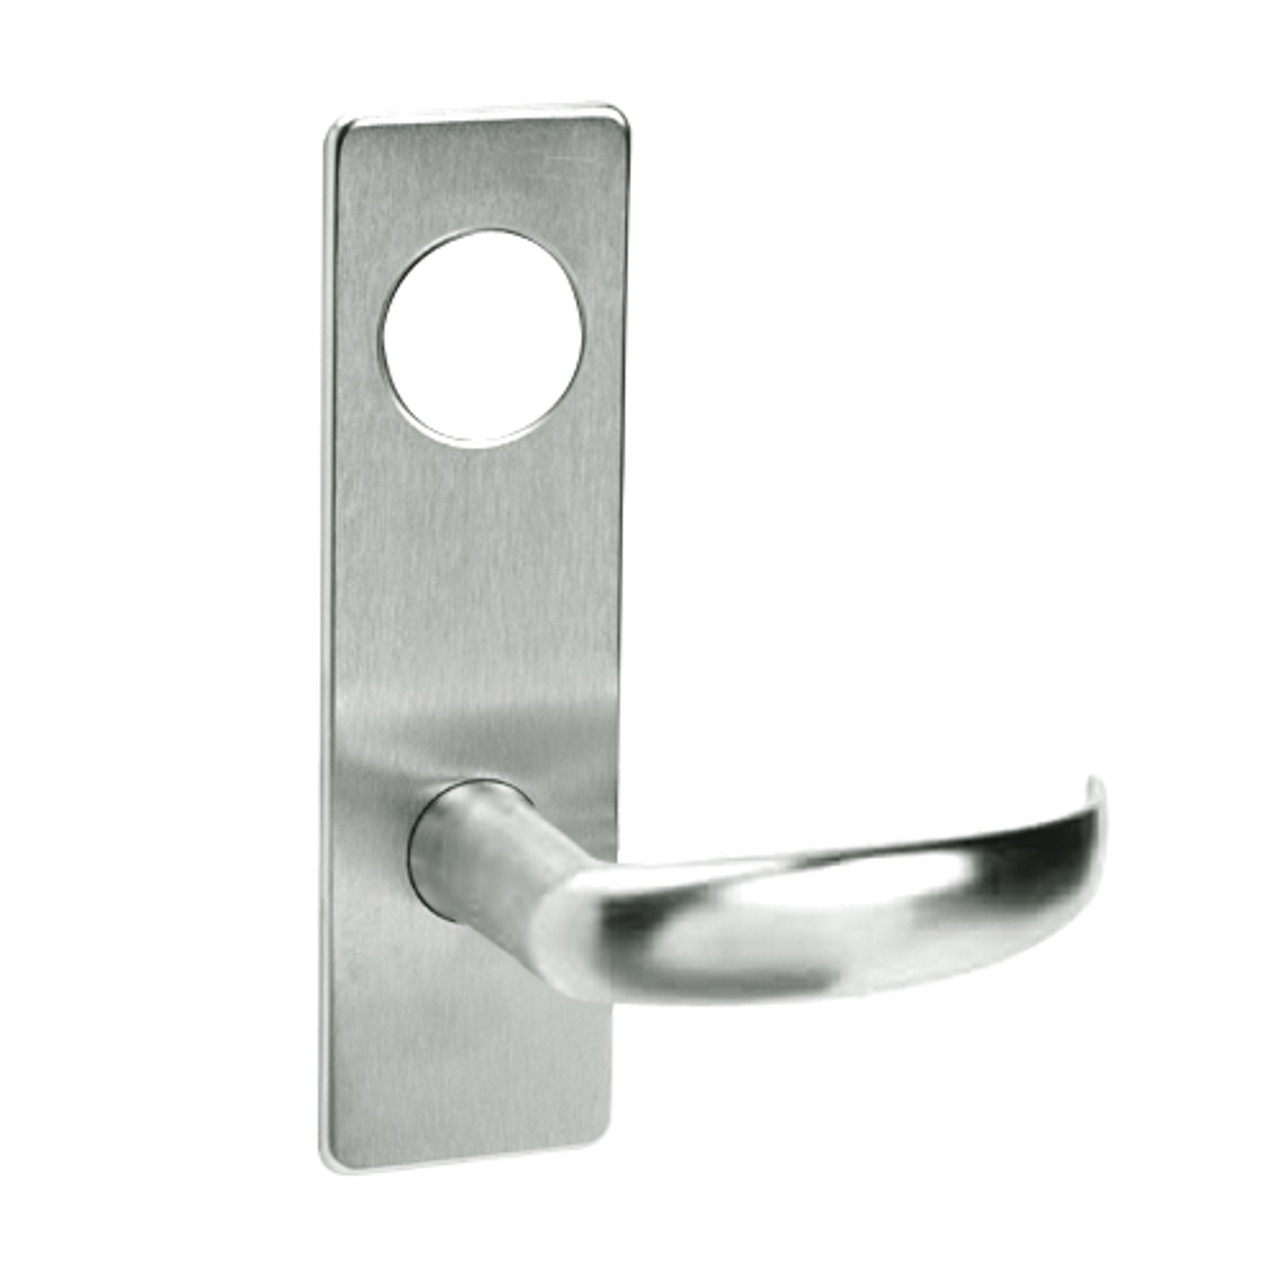 ML2069-PSN-618-LC Corbin Russwin ML2000 Series Mortise Institution Privacy Locksets with Princeton Lever in Bright Nickel